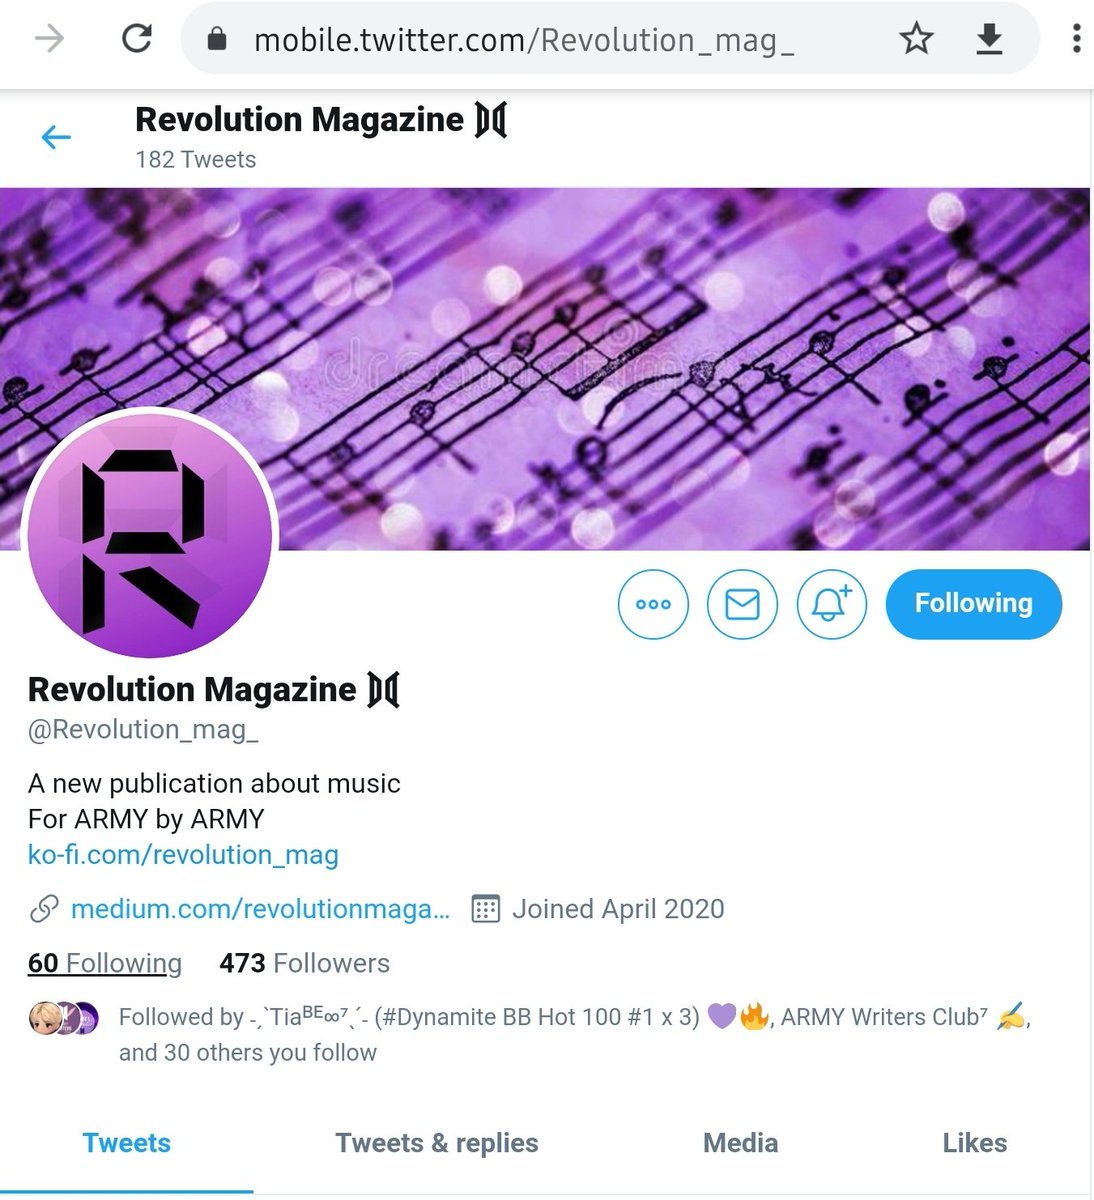 Want to practice the new language you just learned? -  @army_lingua Got the writing bug? -  @ARMYWritersClub What about a Music Magazine dedicated to BTS and ARMY? -  @Revolution_mag_Can't get enough of BTS content? -  @BorasaekVision  #BTSARMY  @BTS_twt